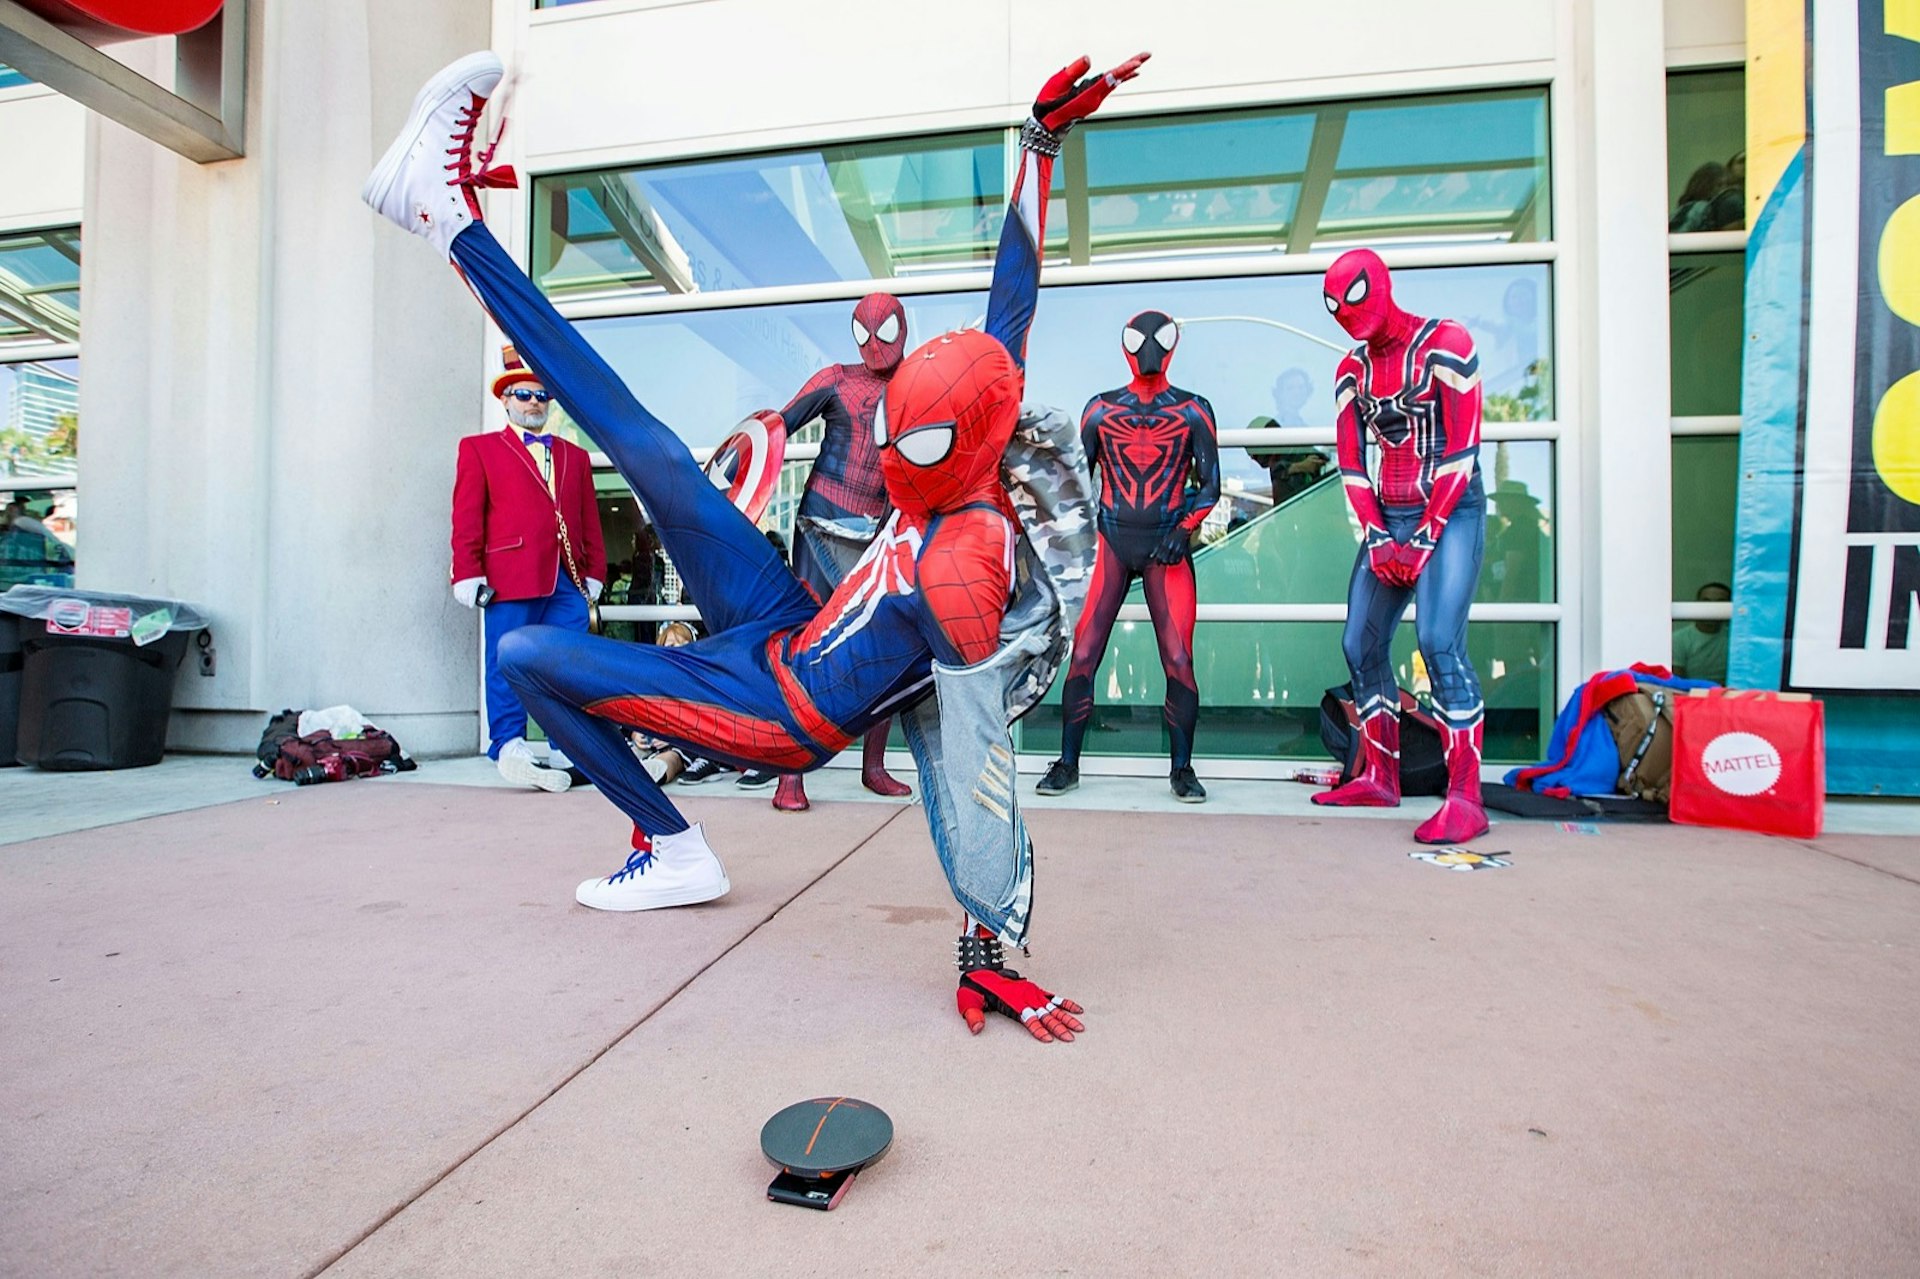 A group of breakdancers performs in Spiderman costumes at ComiCon in San Diego